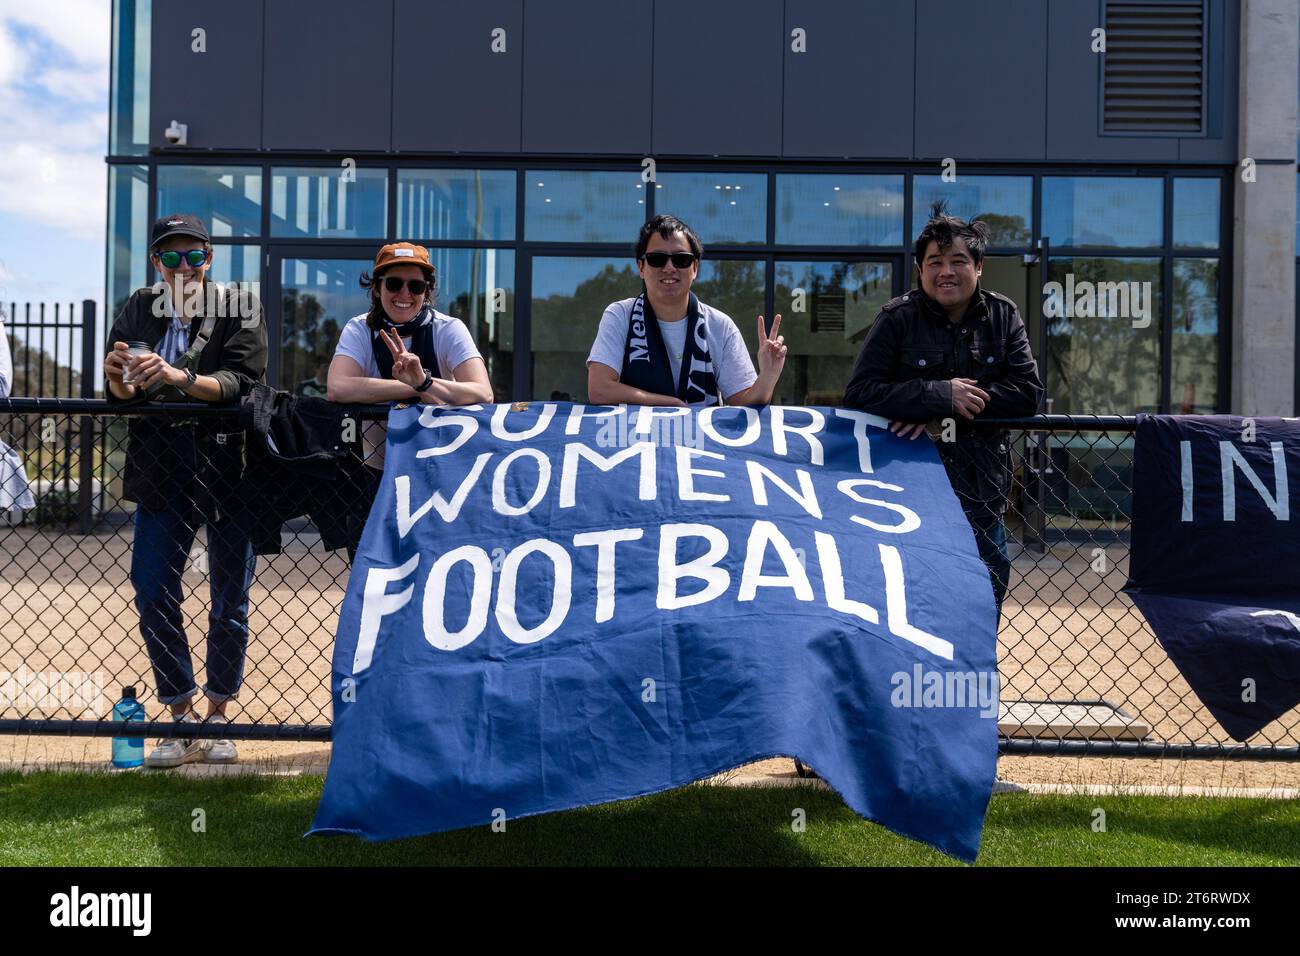 Bundoora, Australia. 12 November, 2023. Melbourne Victory supporters brandishing a banner that reads “Support Women’s Football”. Credit: James Forrester/Alamy Live News Stock Photo